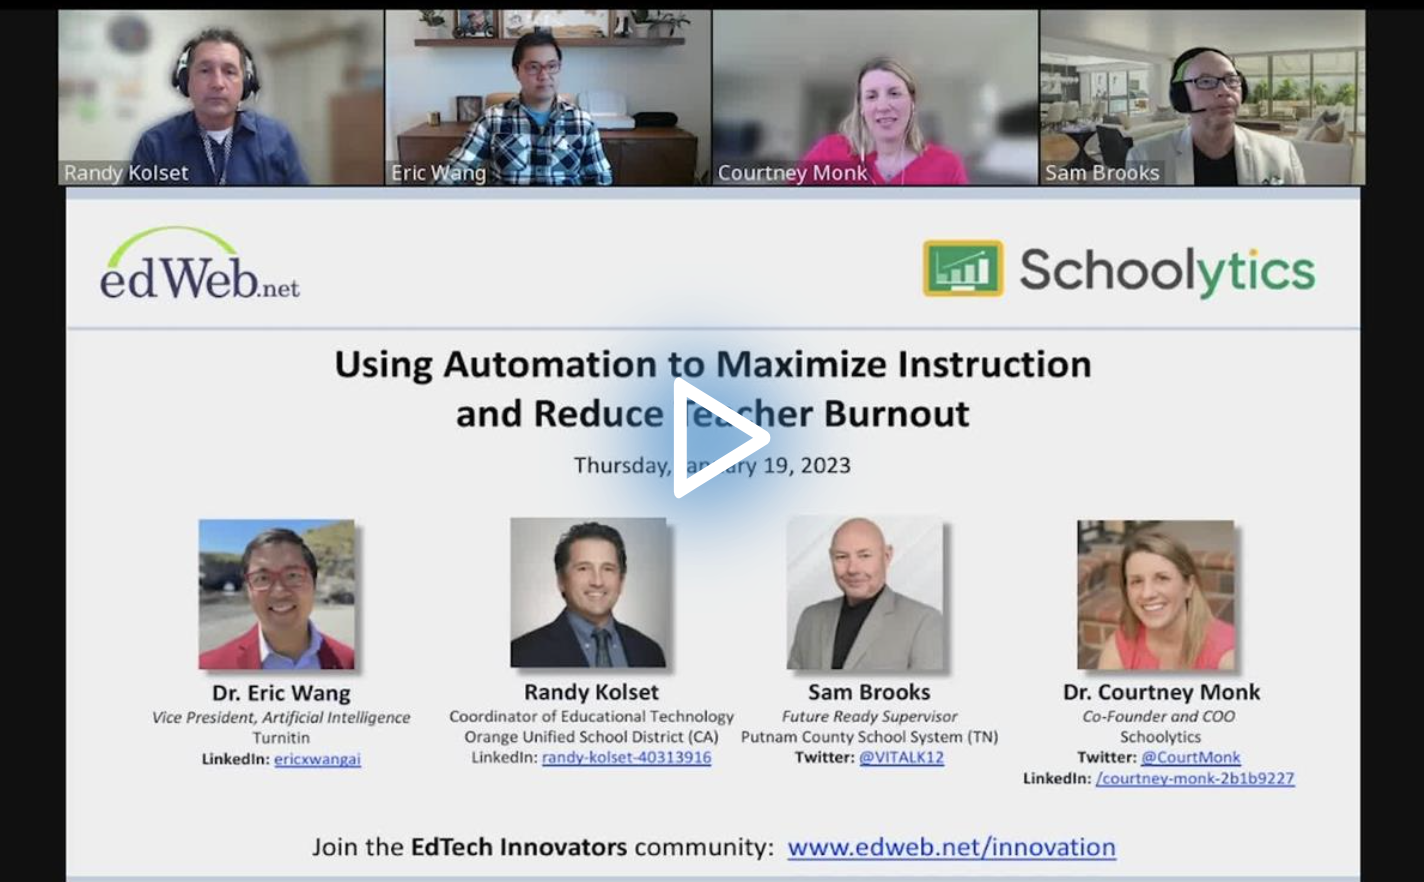 Using Automation to Maximize Instruction and Reduce Teacher Burnout edLeader Panel recording link